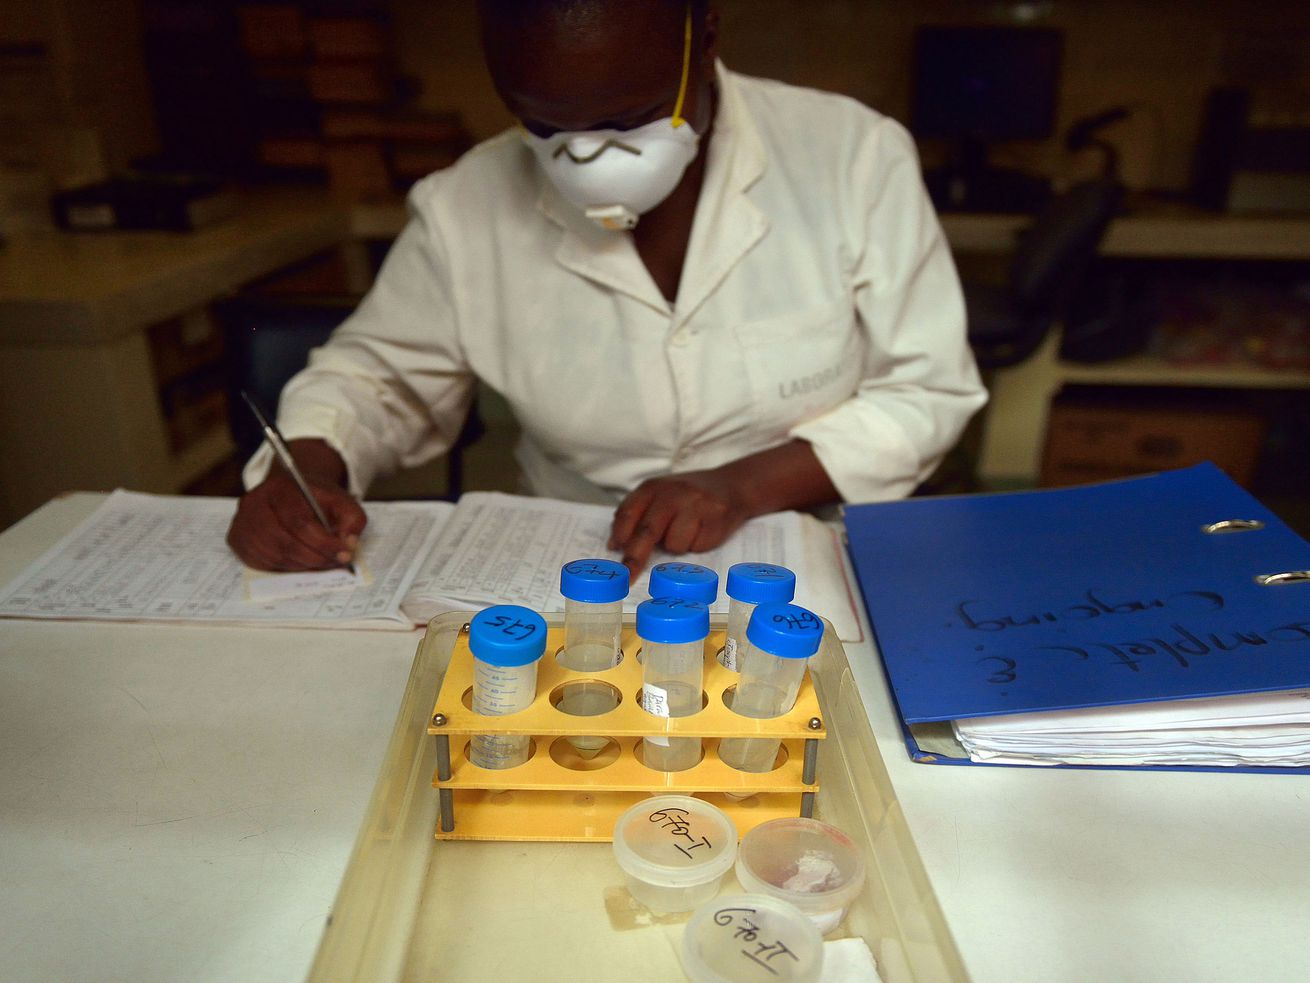 Malawi scientists have a plan to fight one of their country’s biggest killers